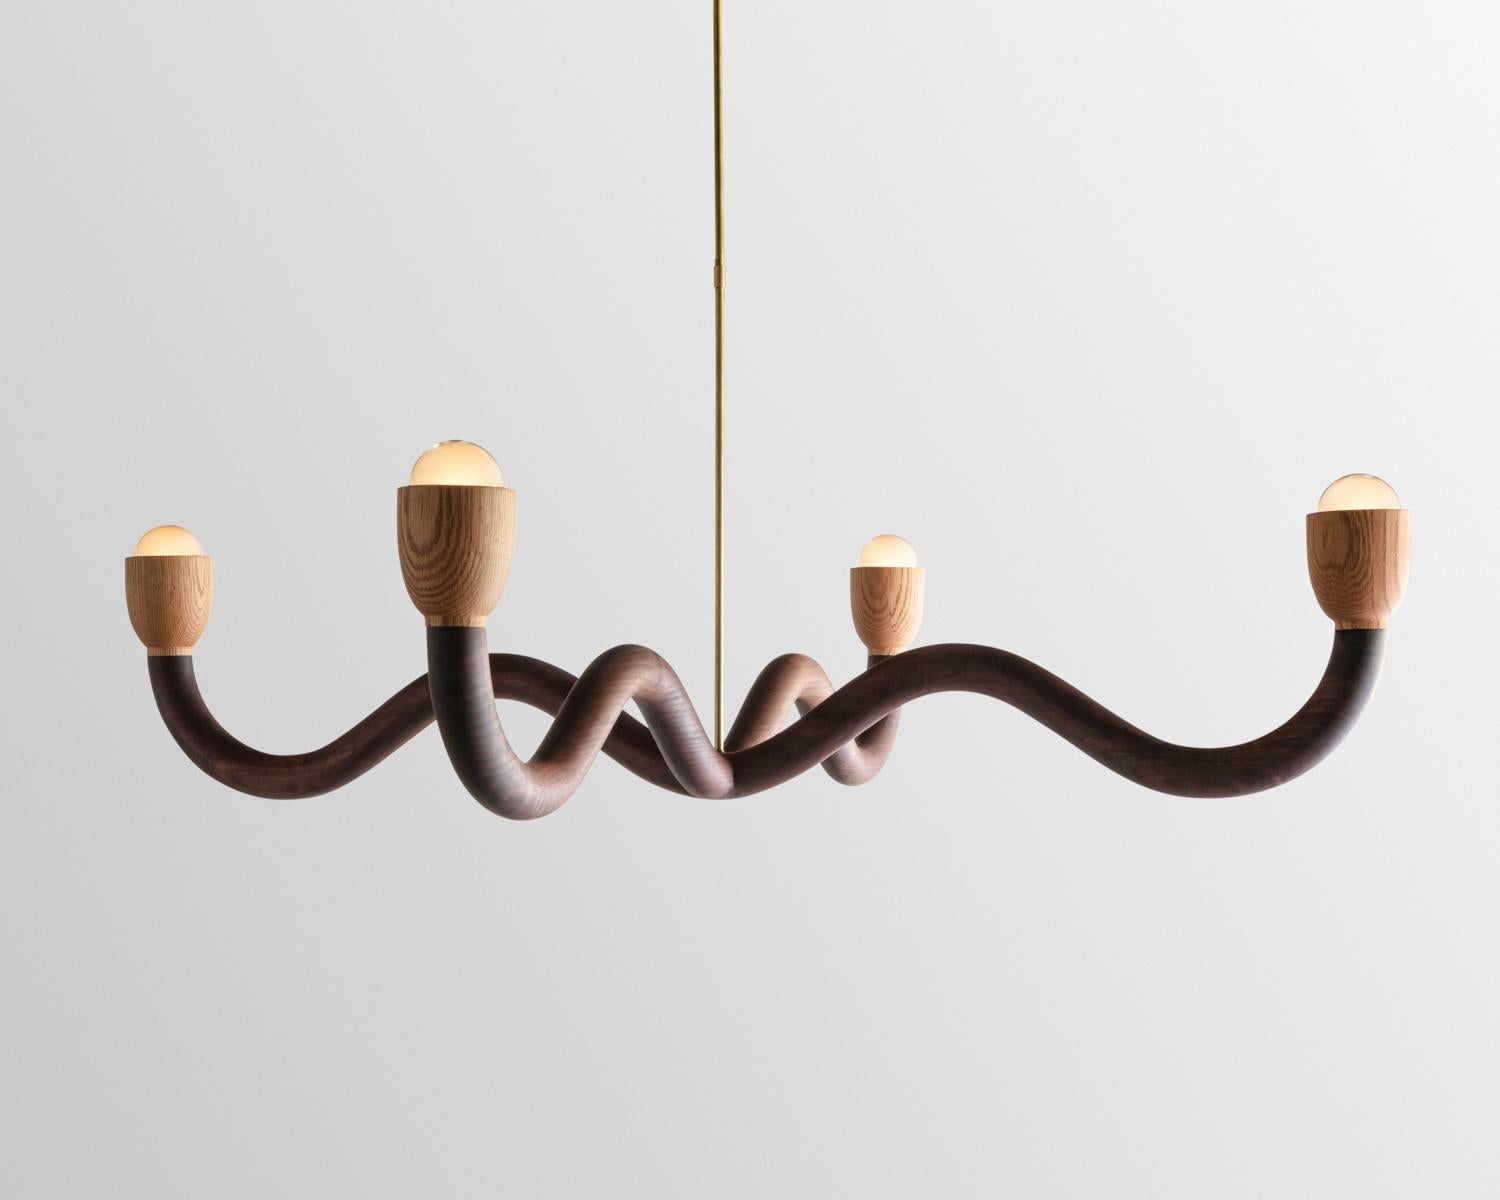 The Squiggle chandelier was created though an exploration of shaping solid walnut slab lumber. Designed to bring a smile to any space, each light is thoughtfully selected to highlight the grain pattern and characteristics of American black walnut.